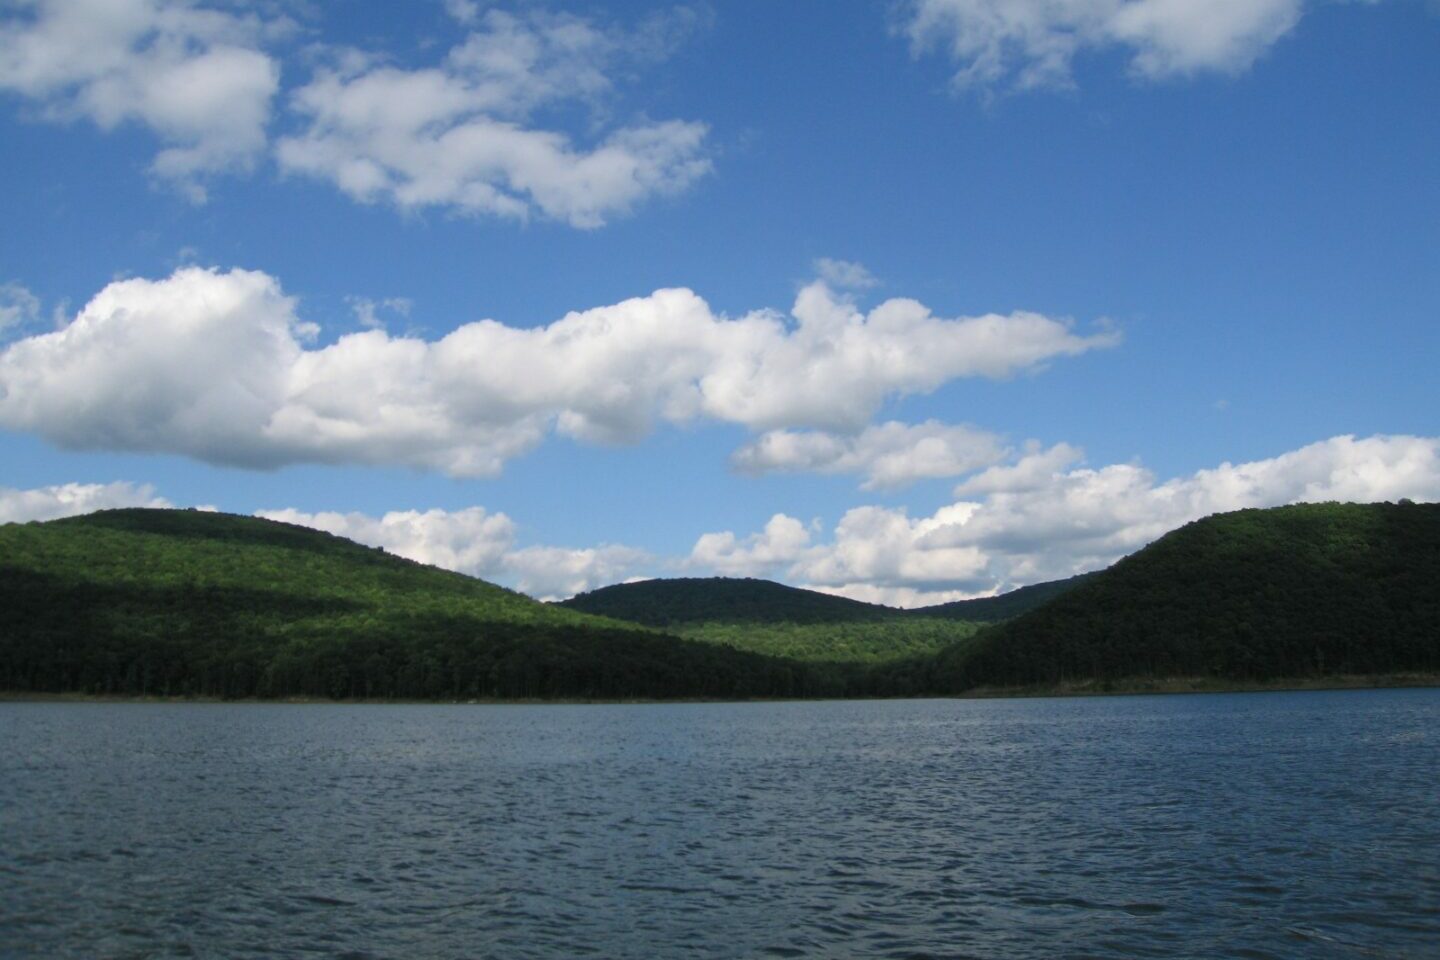 Landscape view looking across the water of Willow Bay in Alleghany National Forest, Pennsylvania